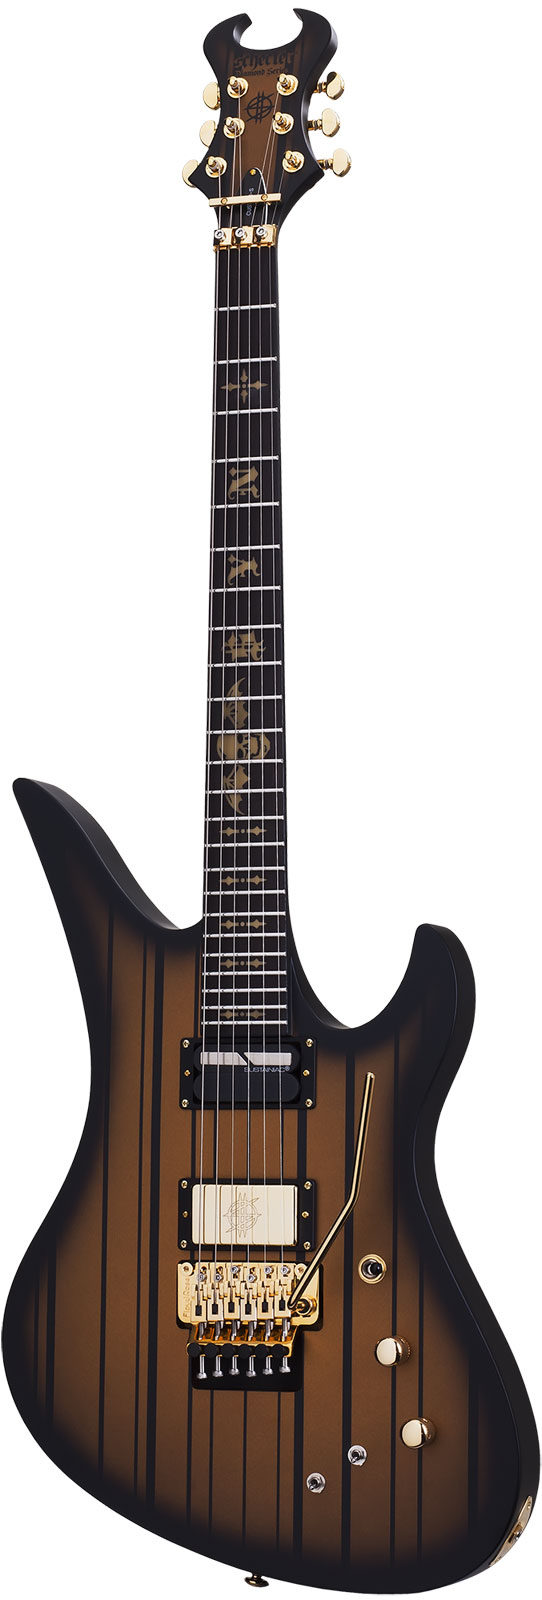 SCHECTER CUSTOM FR SUSTAINIAC SYNYSTER GATE SIGNATURE BLACK GOLD